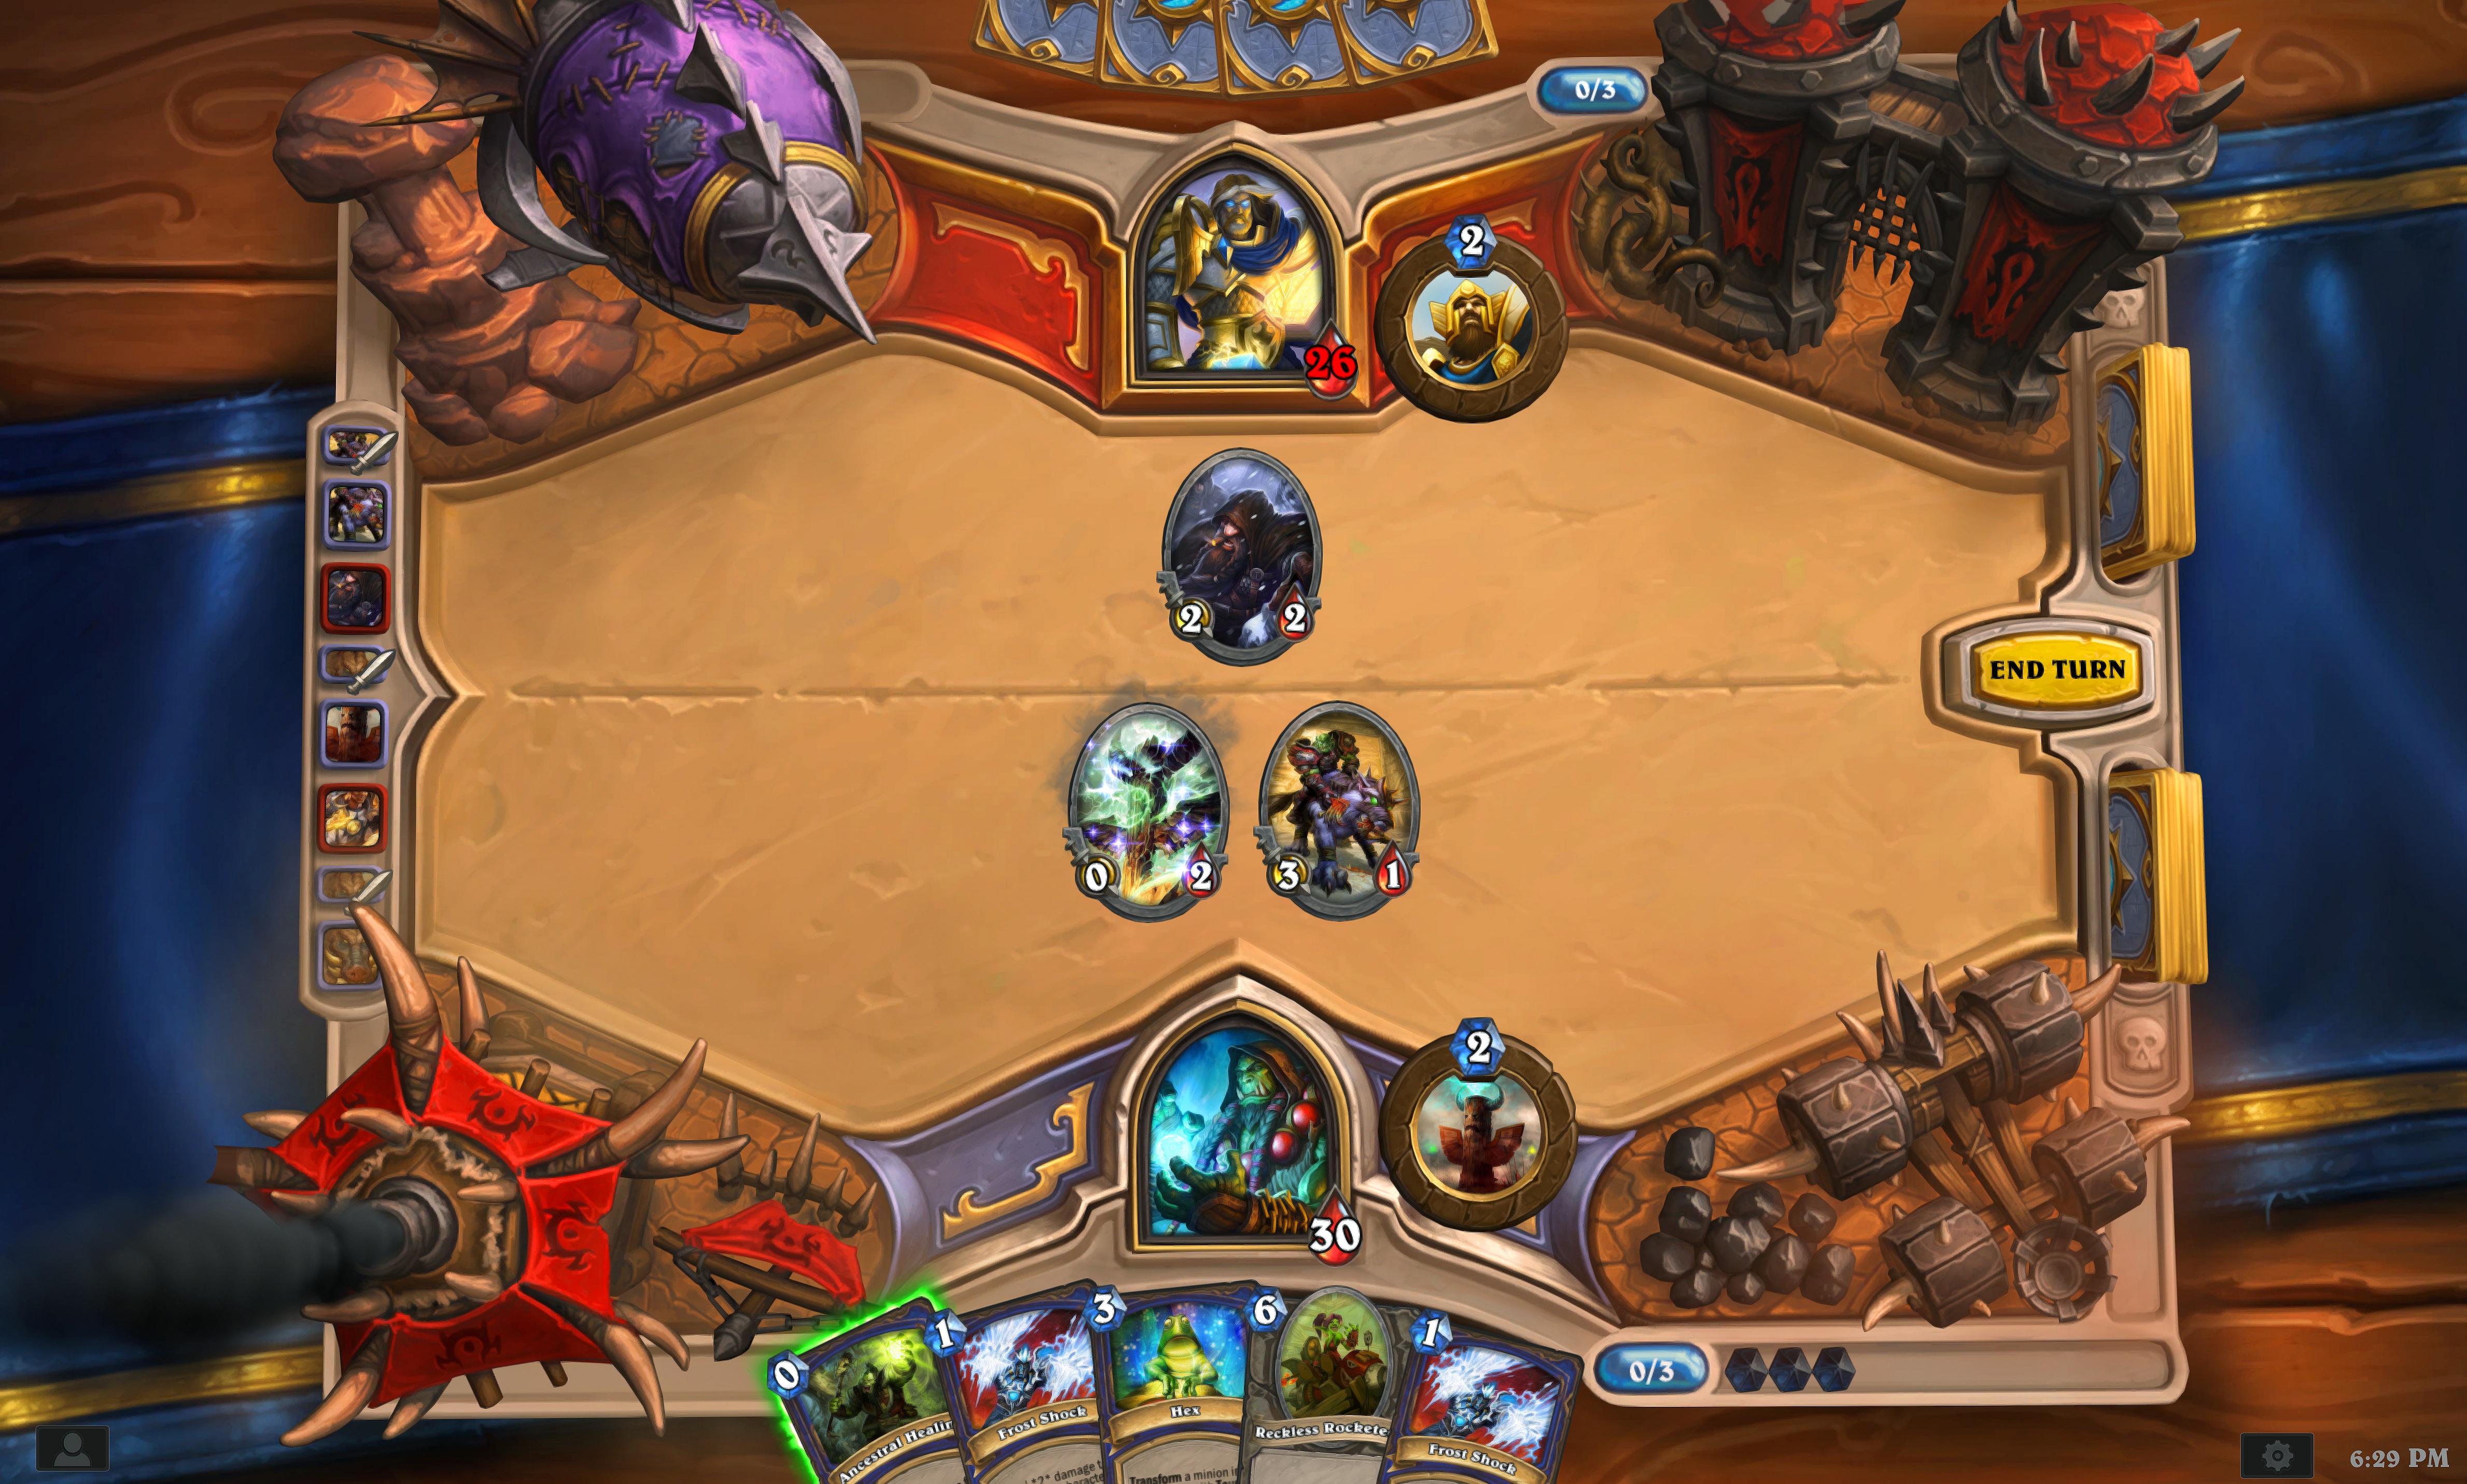 Hearthstone beta survey mentions new features including raids, replays, and paid tournaments